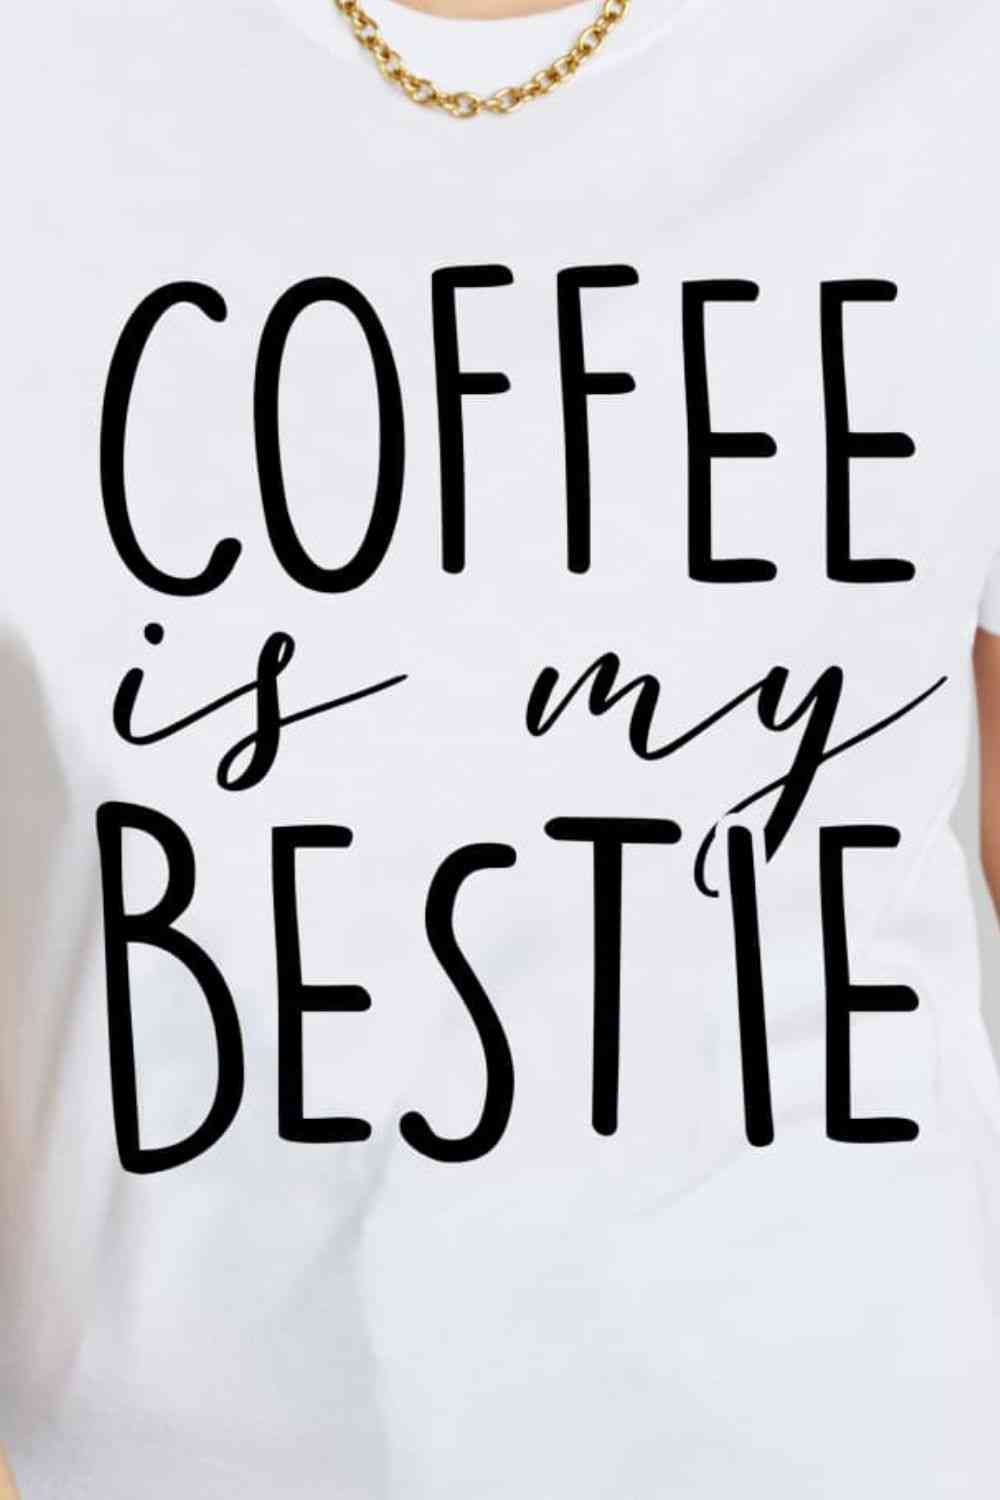 Simply Love Full Size COFFEE IS MY BESTIE Graphic Cotton T-Shirt - TRENDMELO